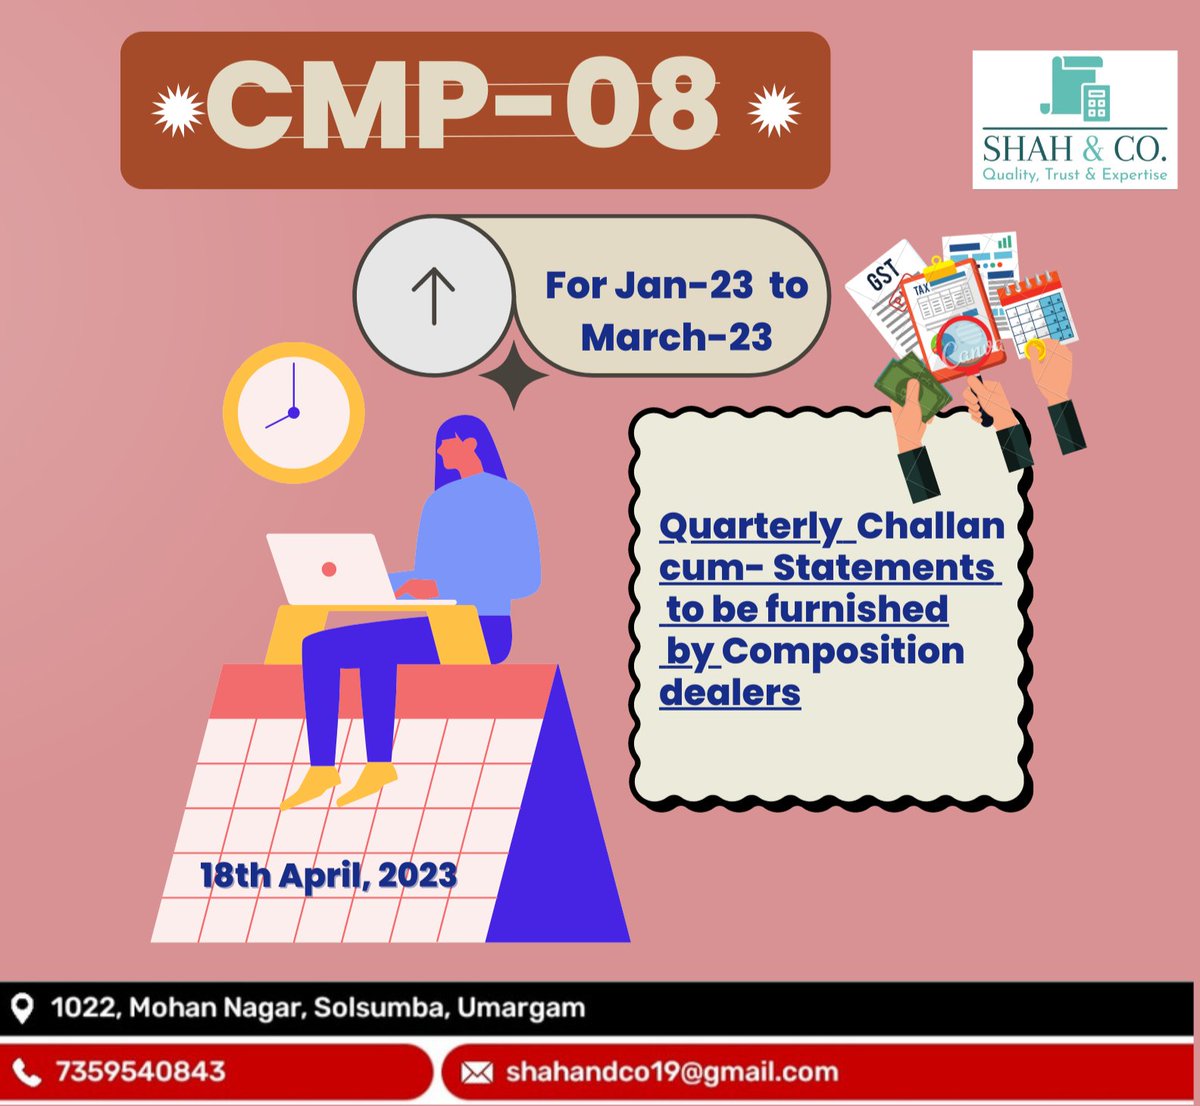 CMP-08 for the Period Jan-23 to March- 23 

#composition #CMP08 #Challamcumfiling #compositiondealers #GST #gstfiling  #gstpayment #gstreturns #gstindia #Gst